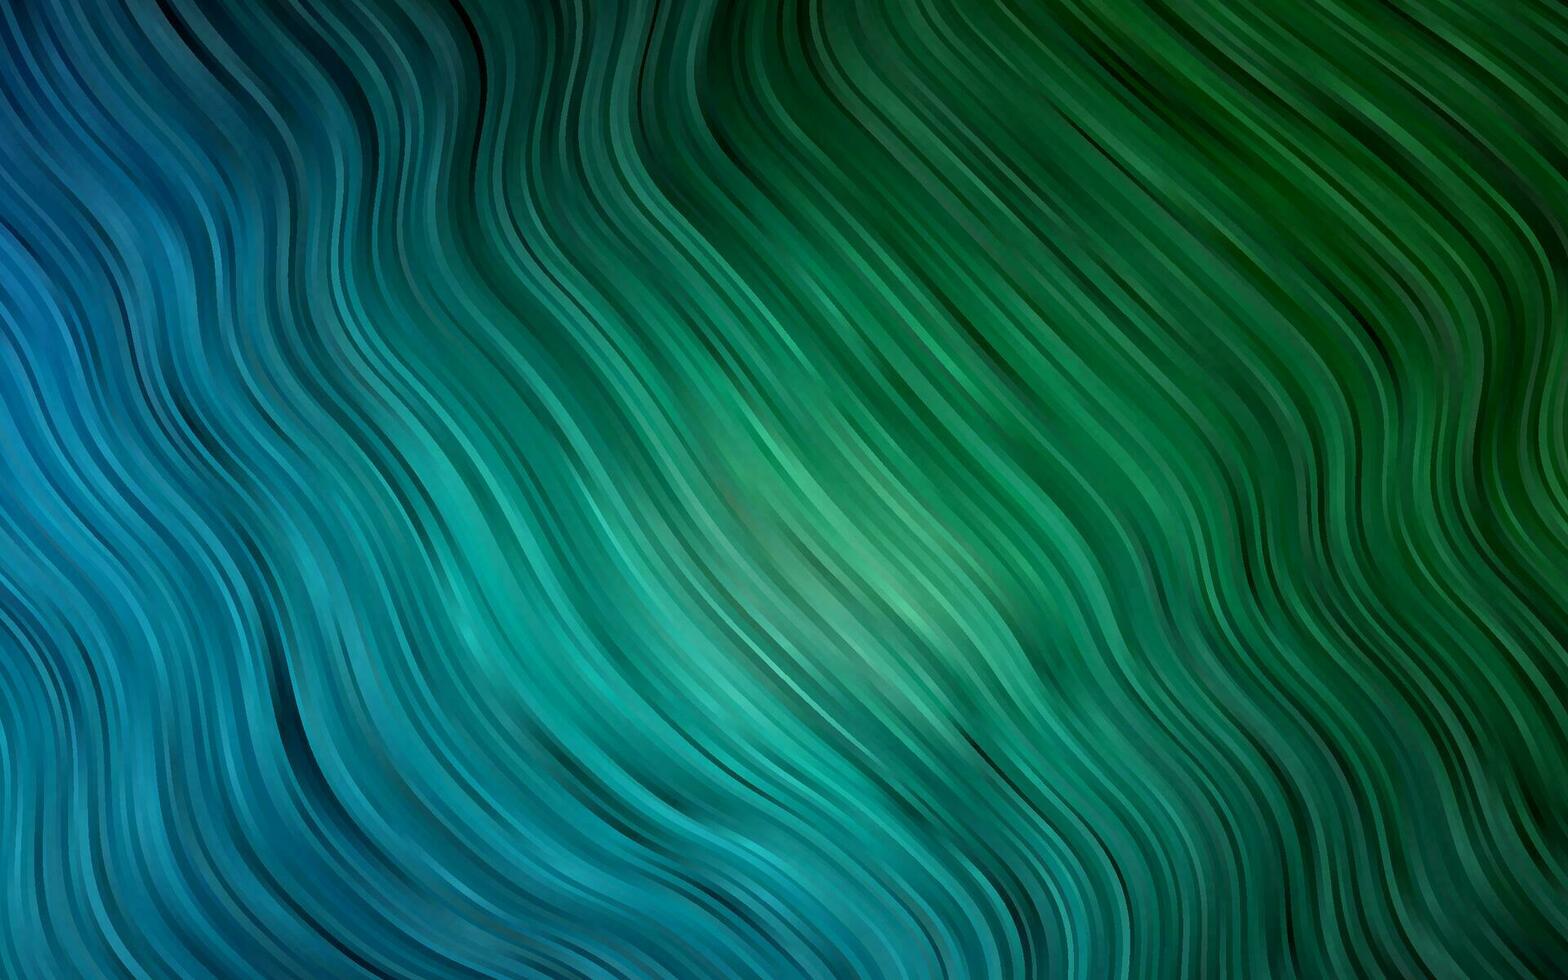 Dark Blue, Green vector template with liquid shapes.